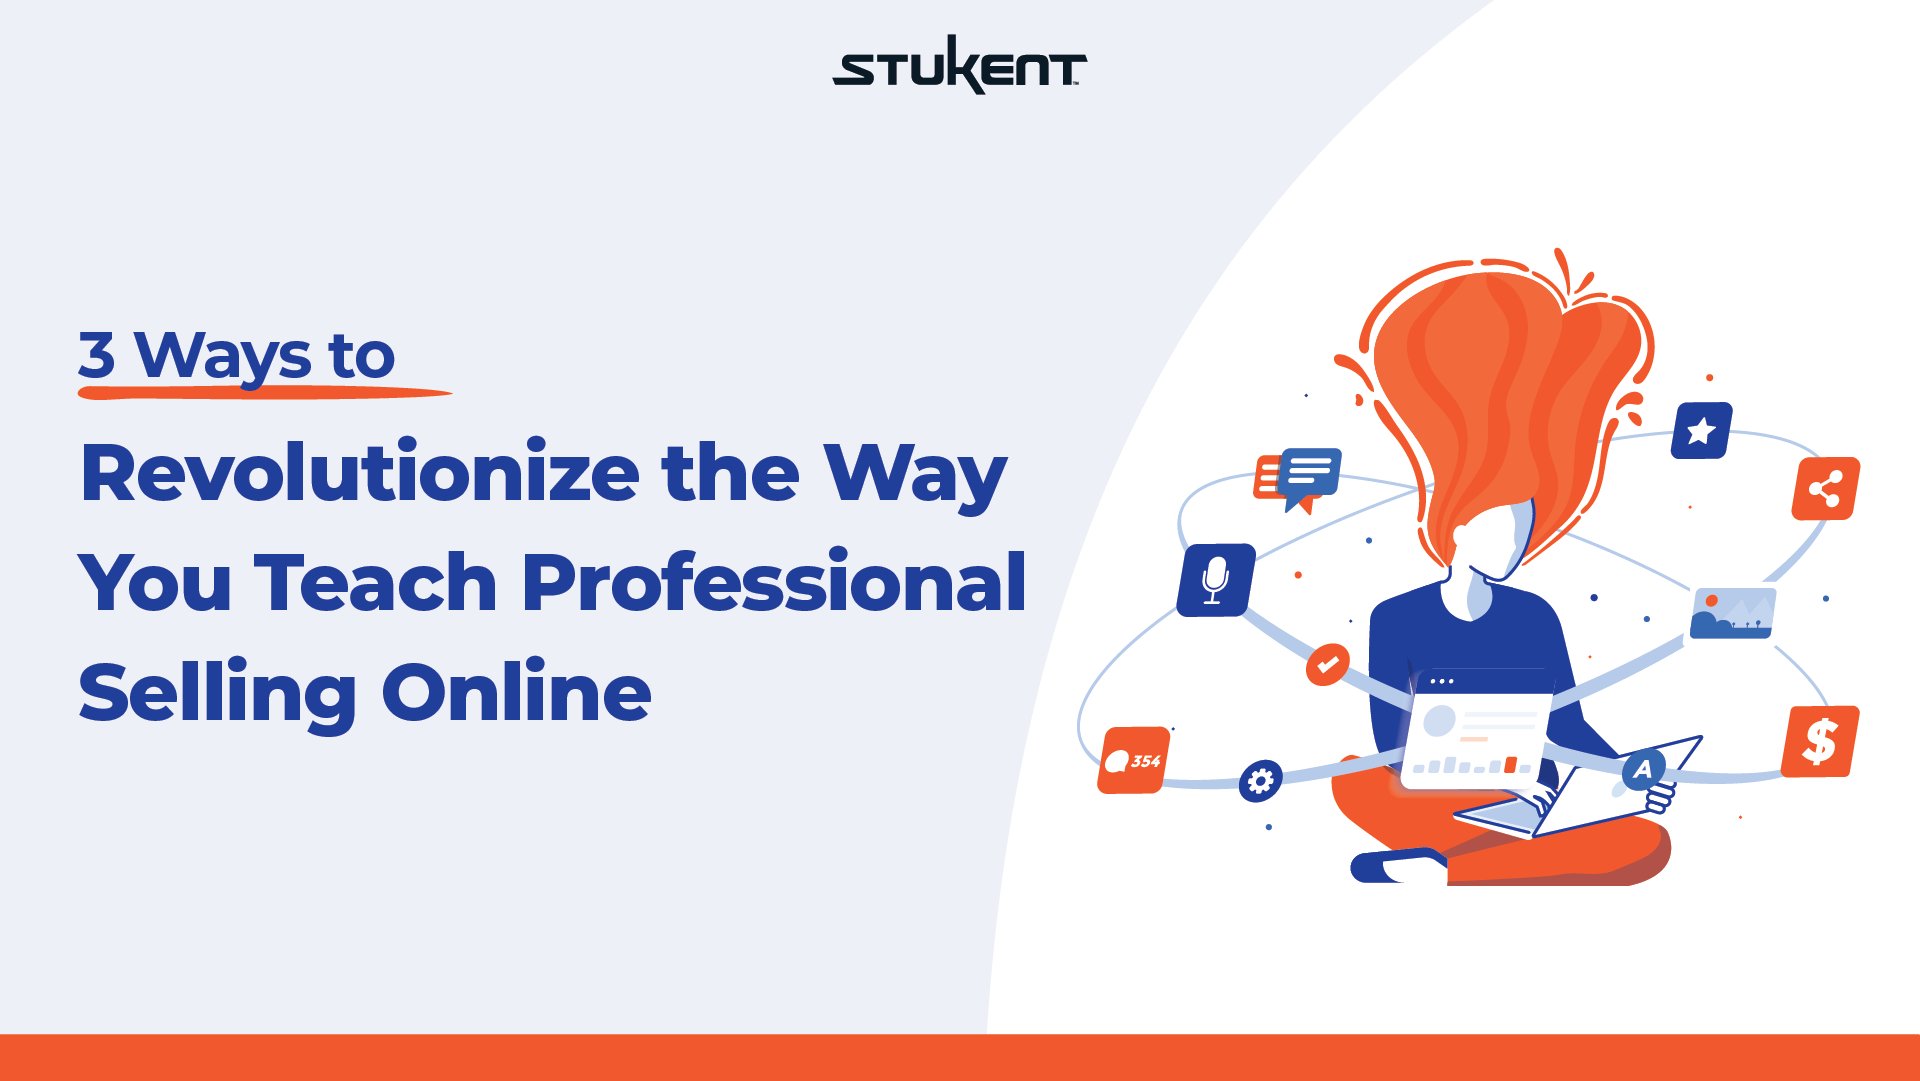 "3 Ways to Revolutionize the Way You Teach Professional Selling Online"